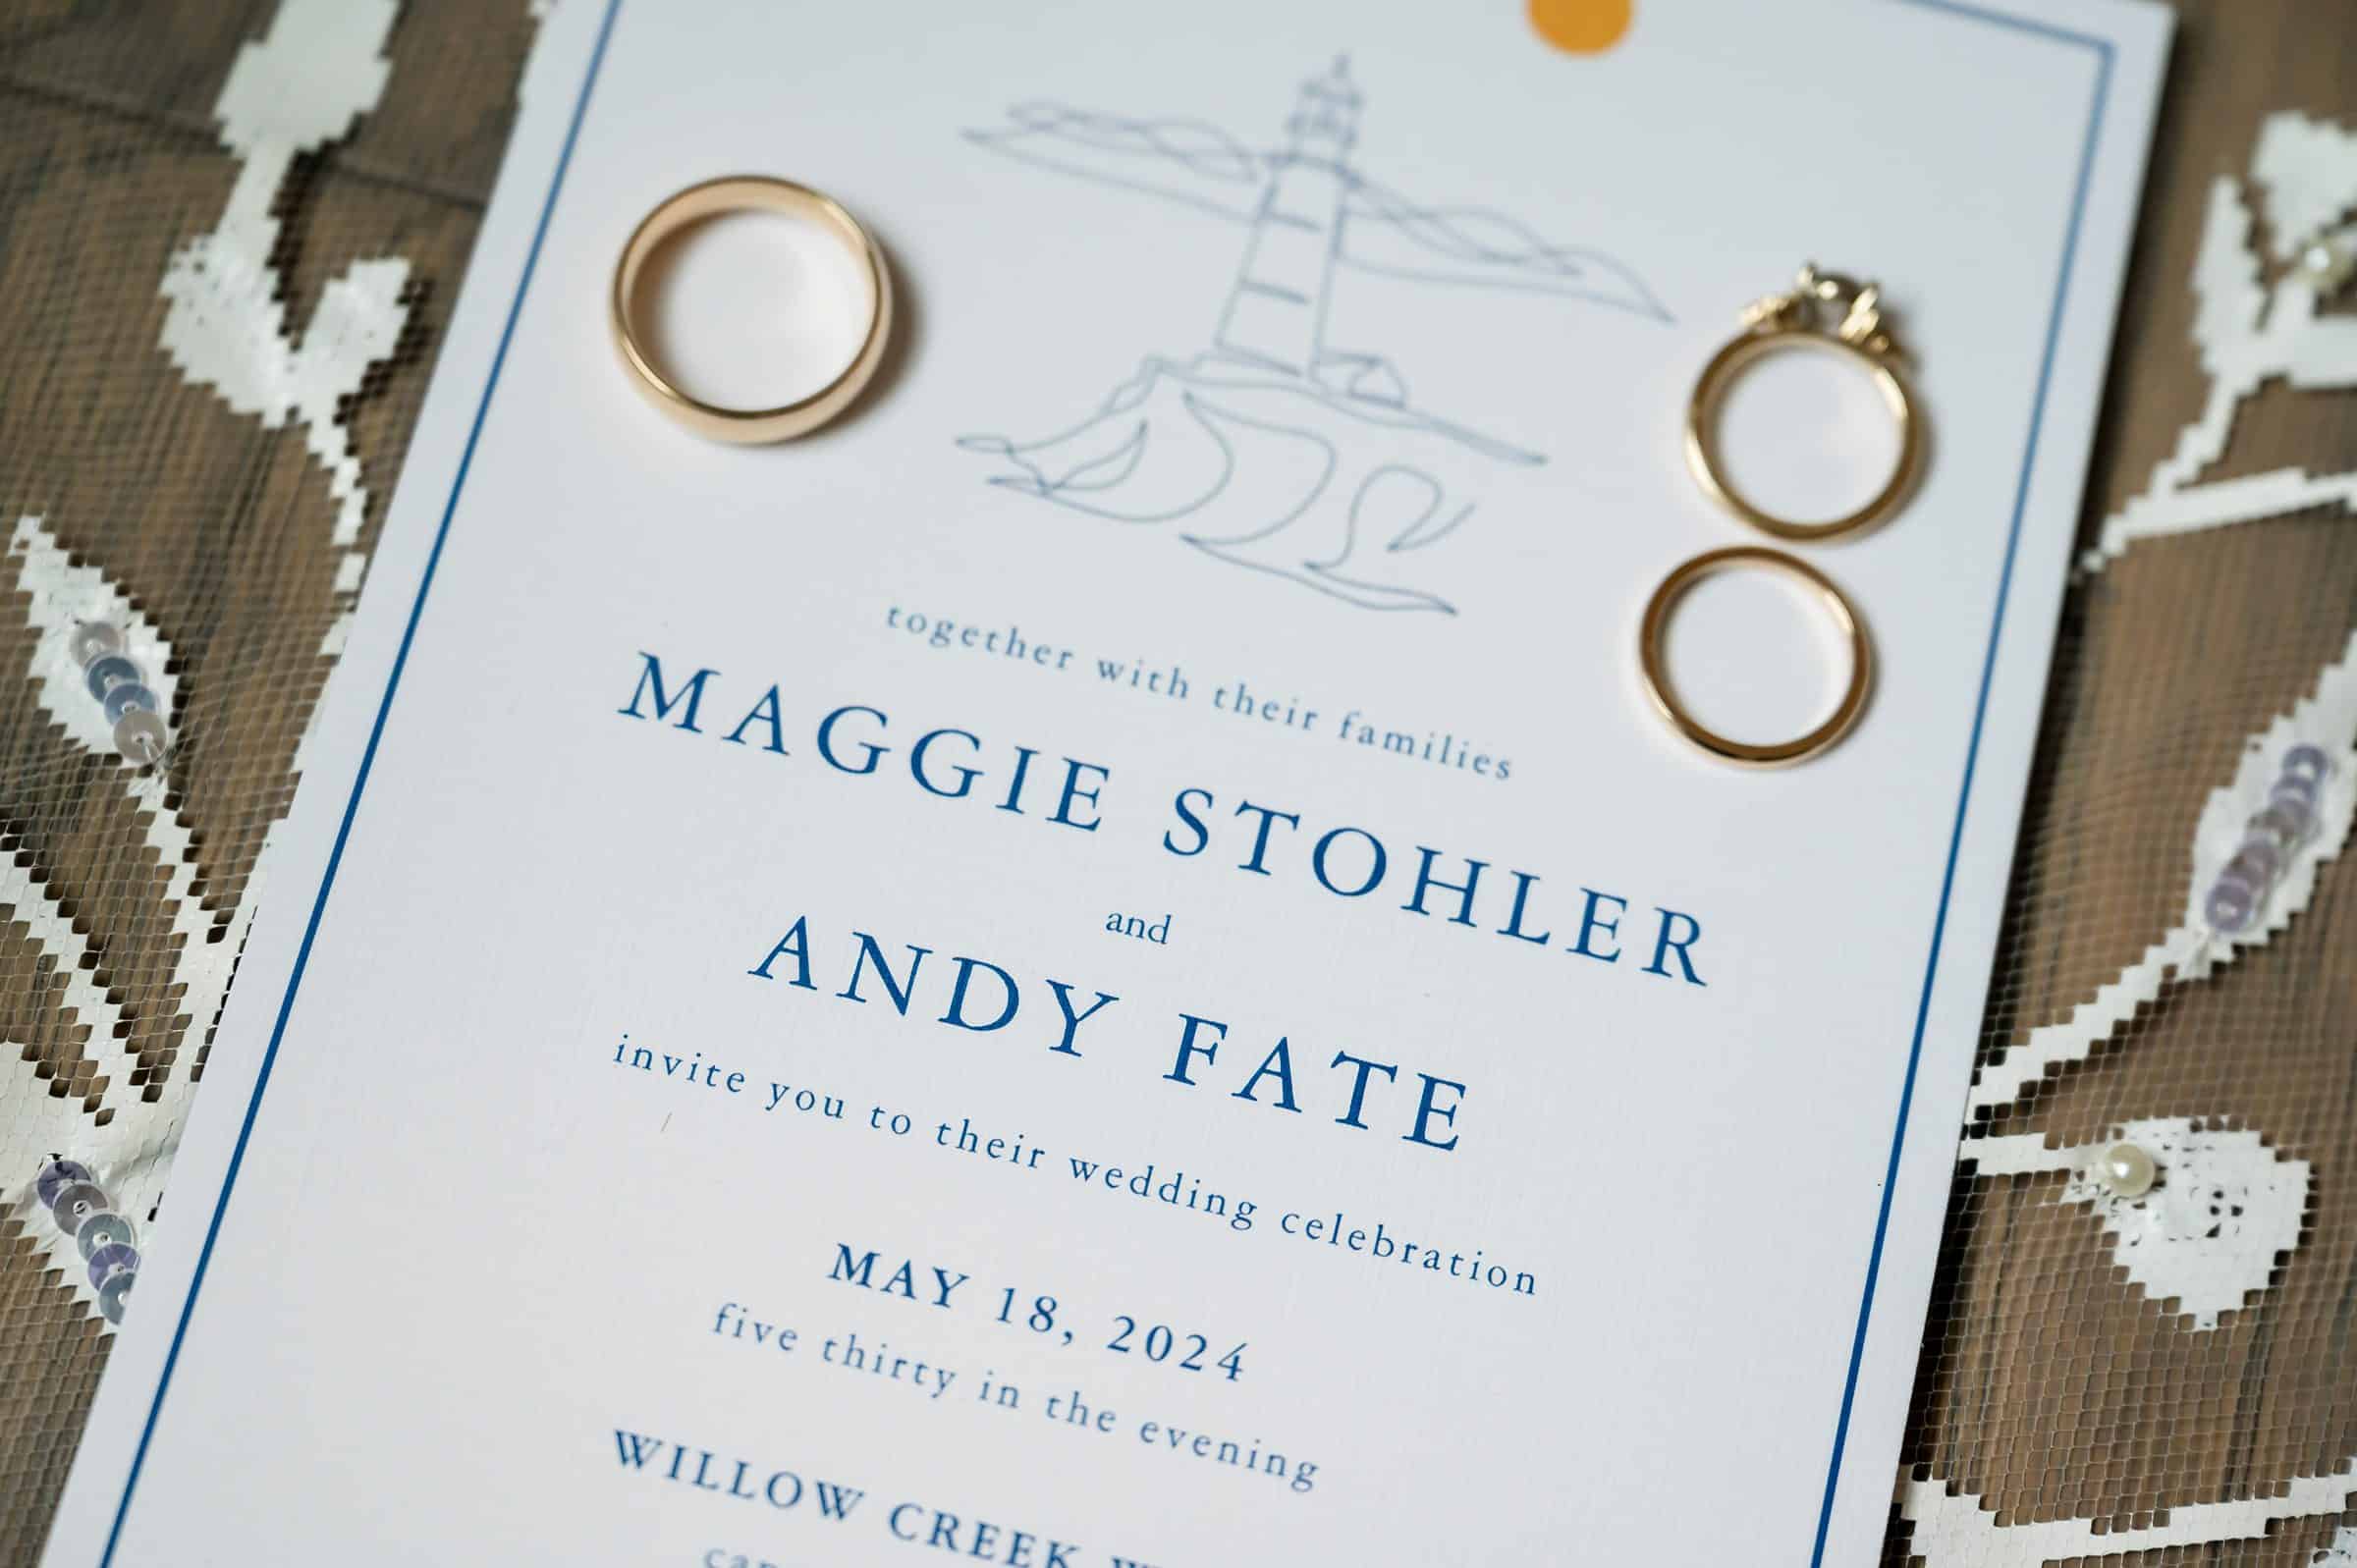 A wedding invitation for Maggie Stohler and Andy Fate's ceremony on May 18, 2024, at 5:30 PM, featuring two gold wedding bands and an engagement ring.